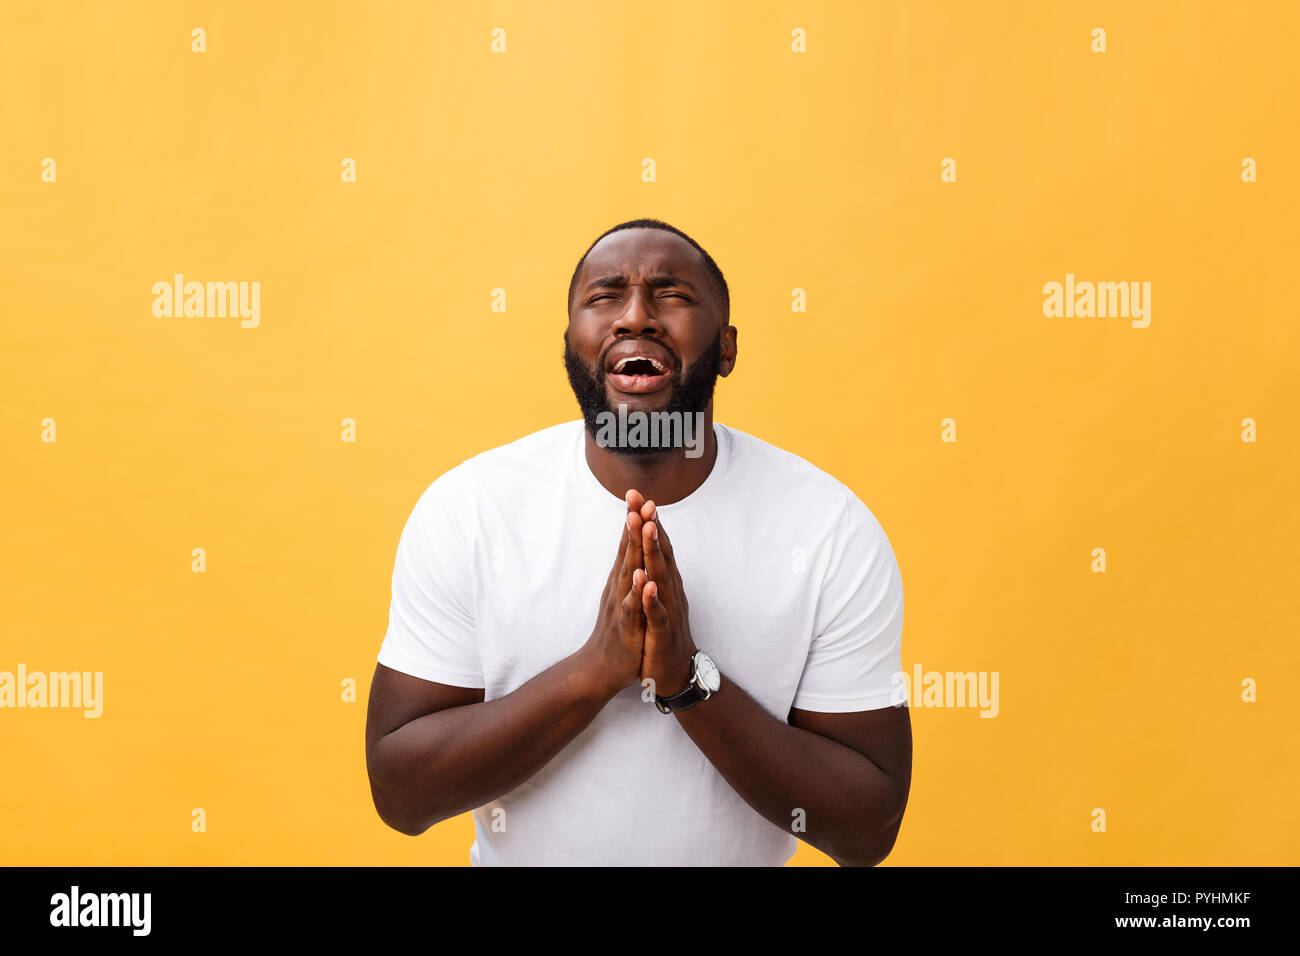 Studio portrait of young African American man in white shirt, holding hands in prayer, looking at the camera with thoughtful skeptical expression on his face, suspecting of something. Body language. Stock Photo